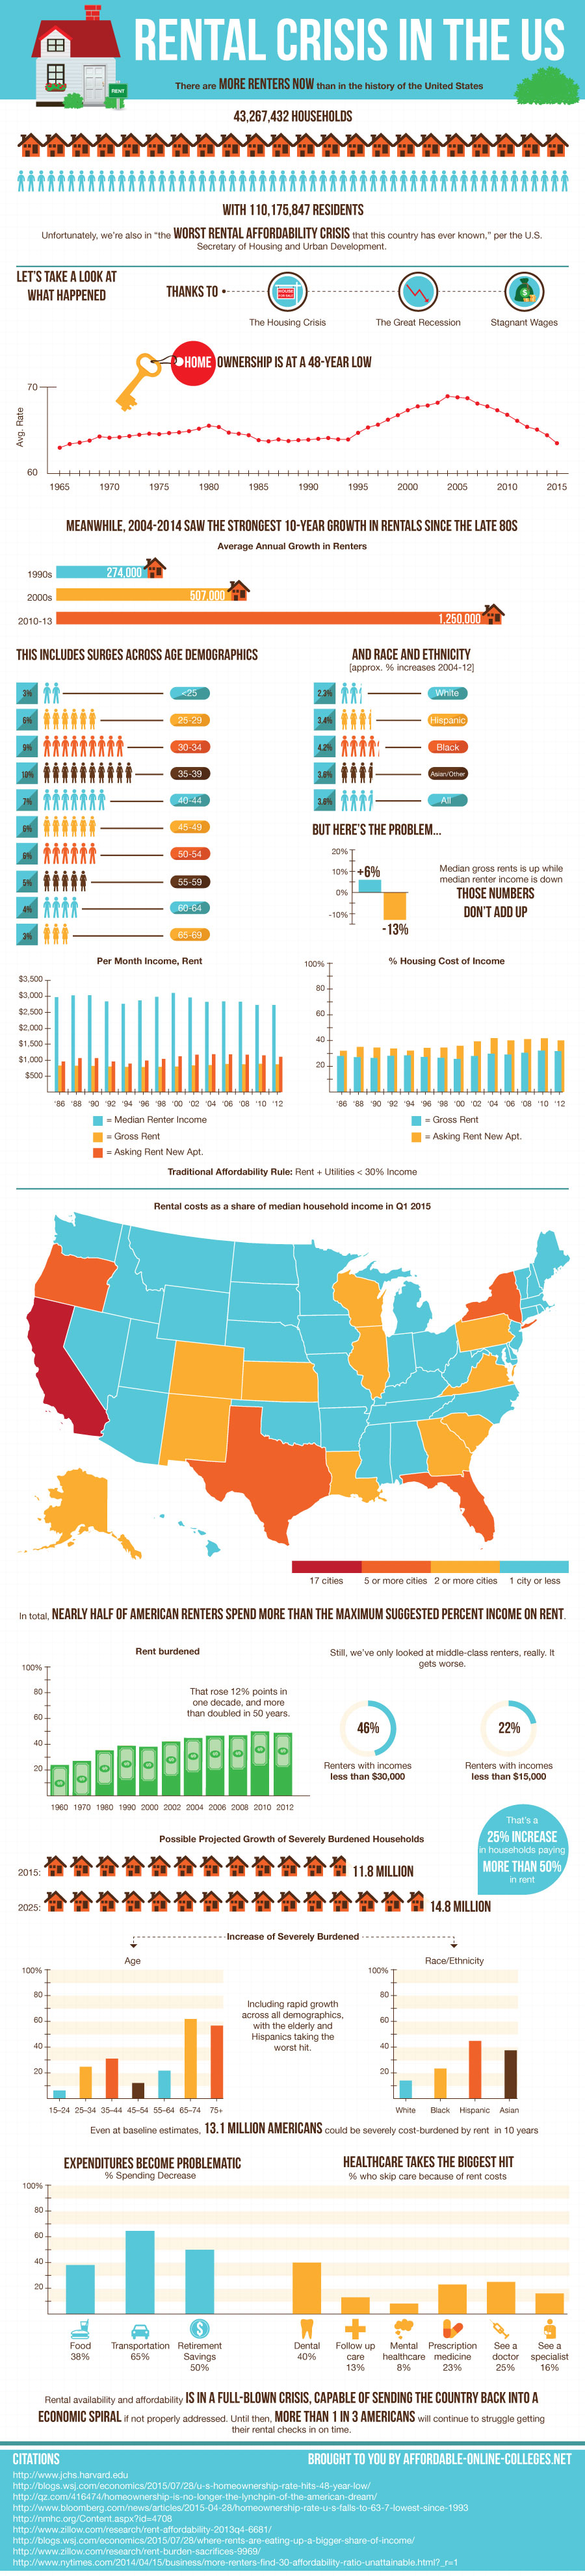 Rental Housing Crisis in the US Visual.ly